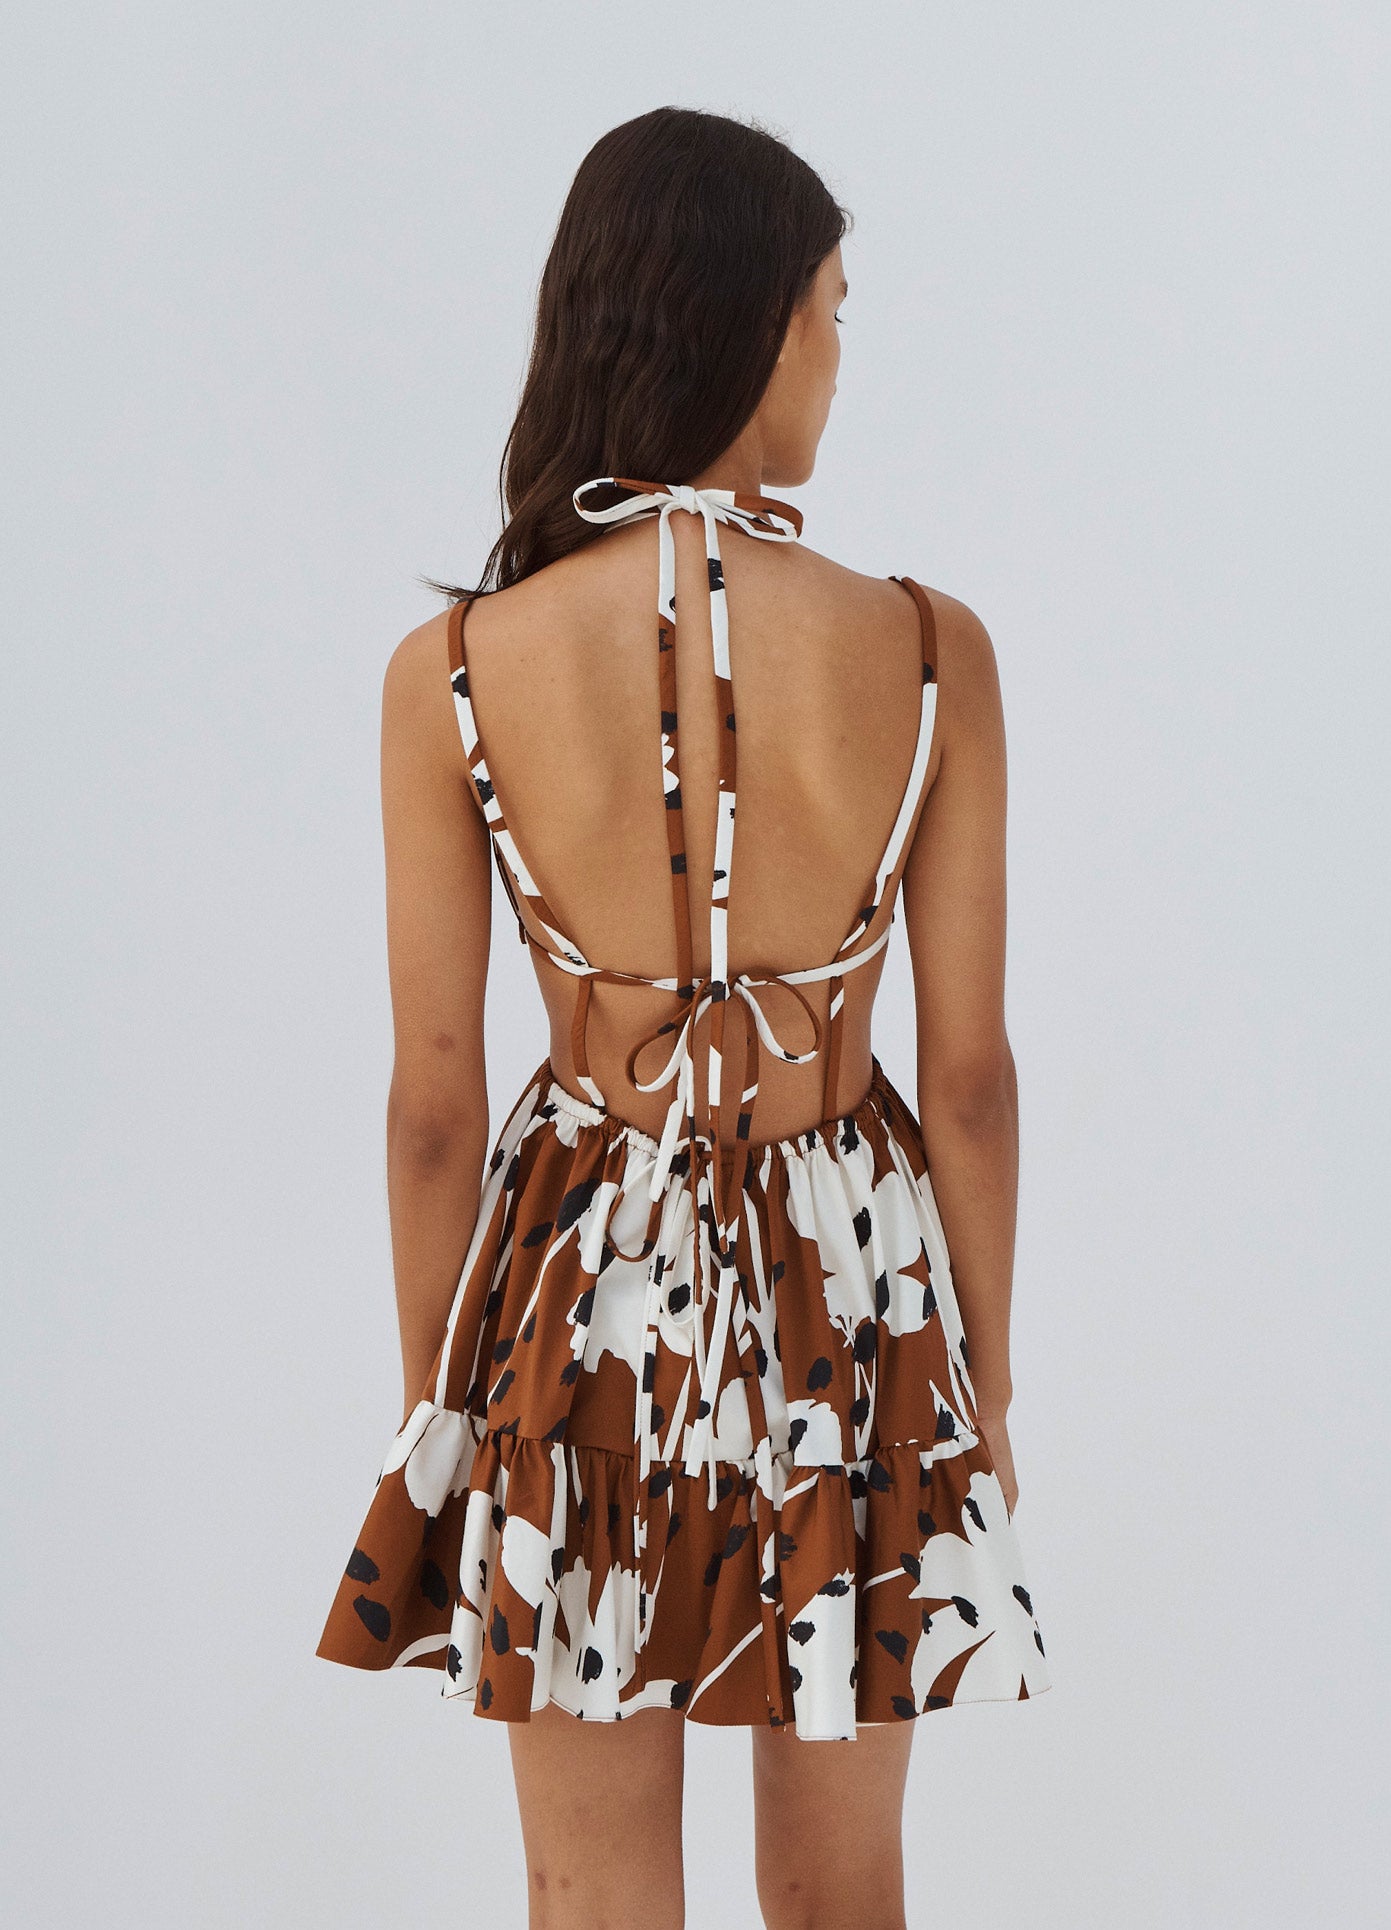 MONSE Floral Print Bra Detail Dress in Brown and Ivory on Model Back View